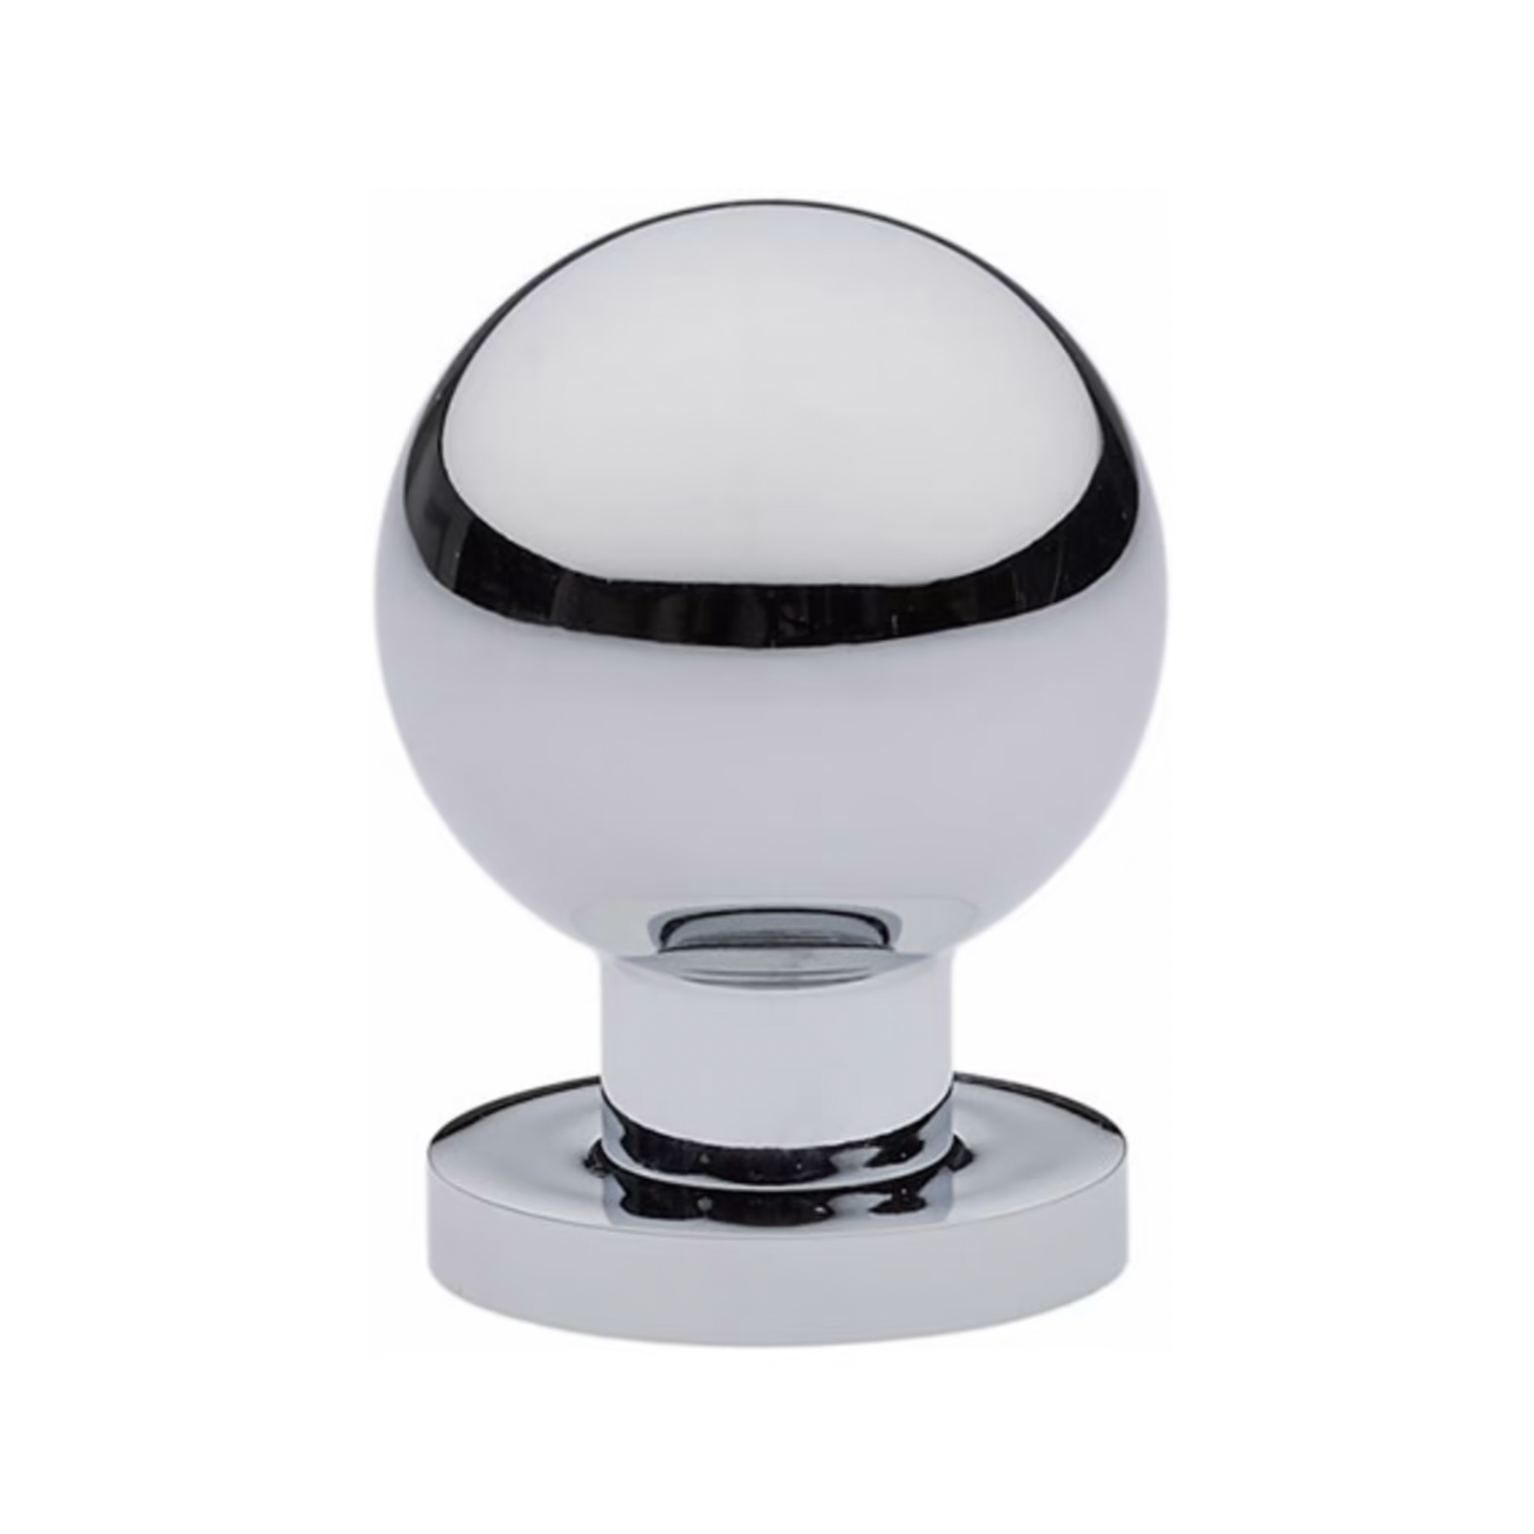 Omni Cabinet Knobs and Drawer Pulls in Polished Chrome